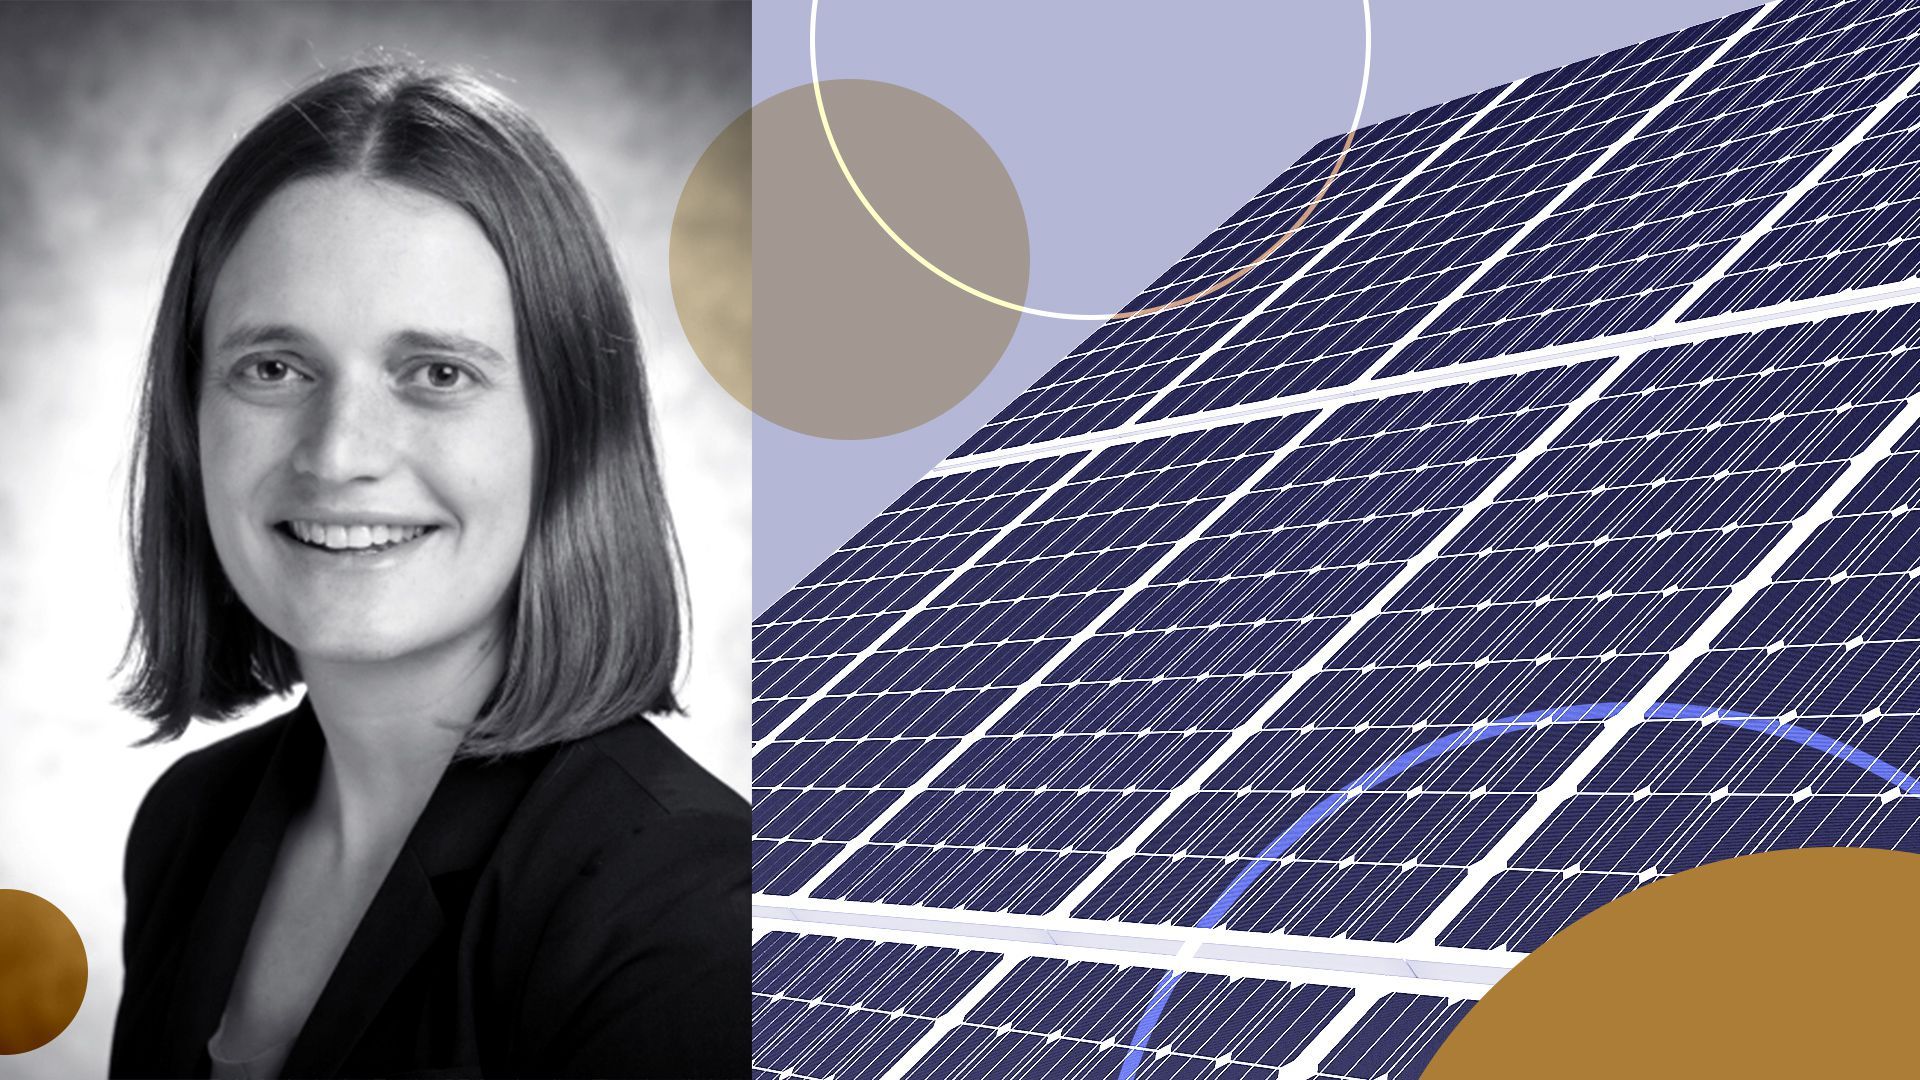 Photo illustration of Becca Jones-Albertus with solar panels and abstract shapes.